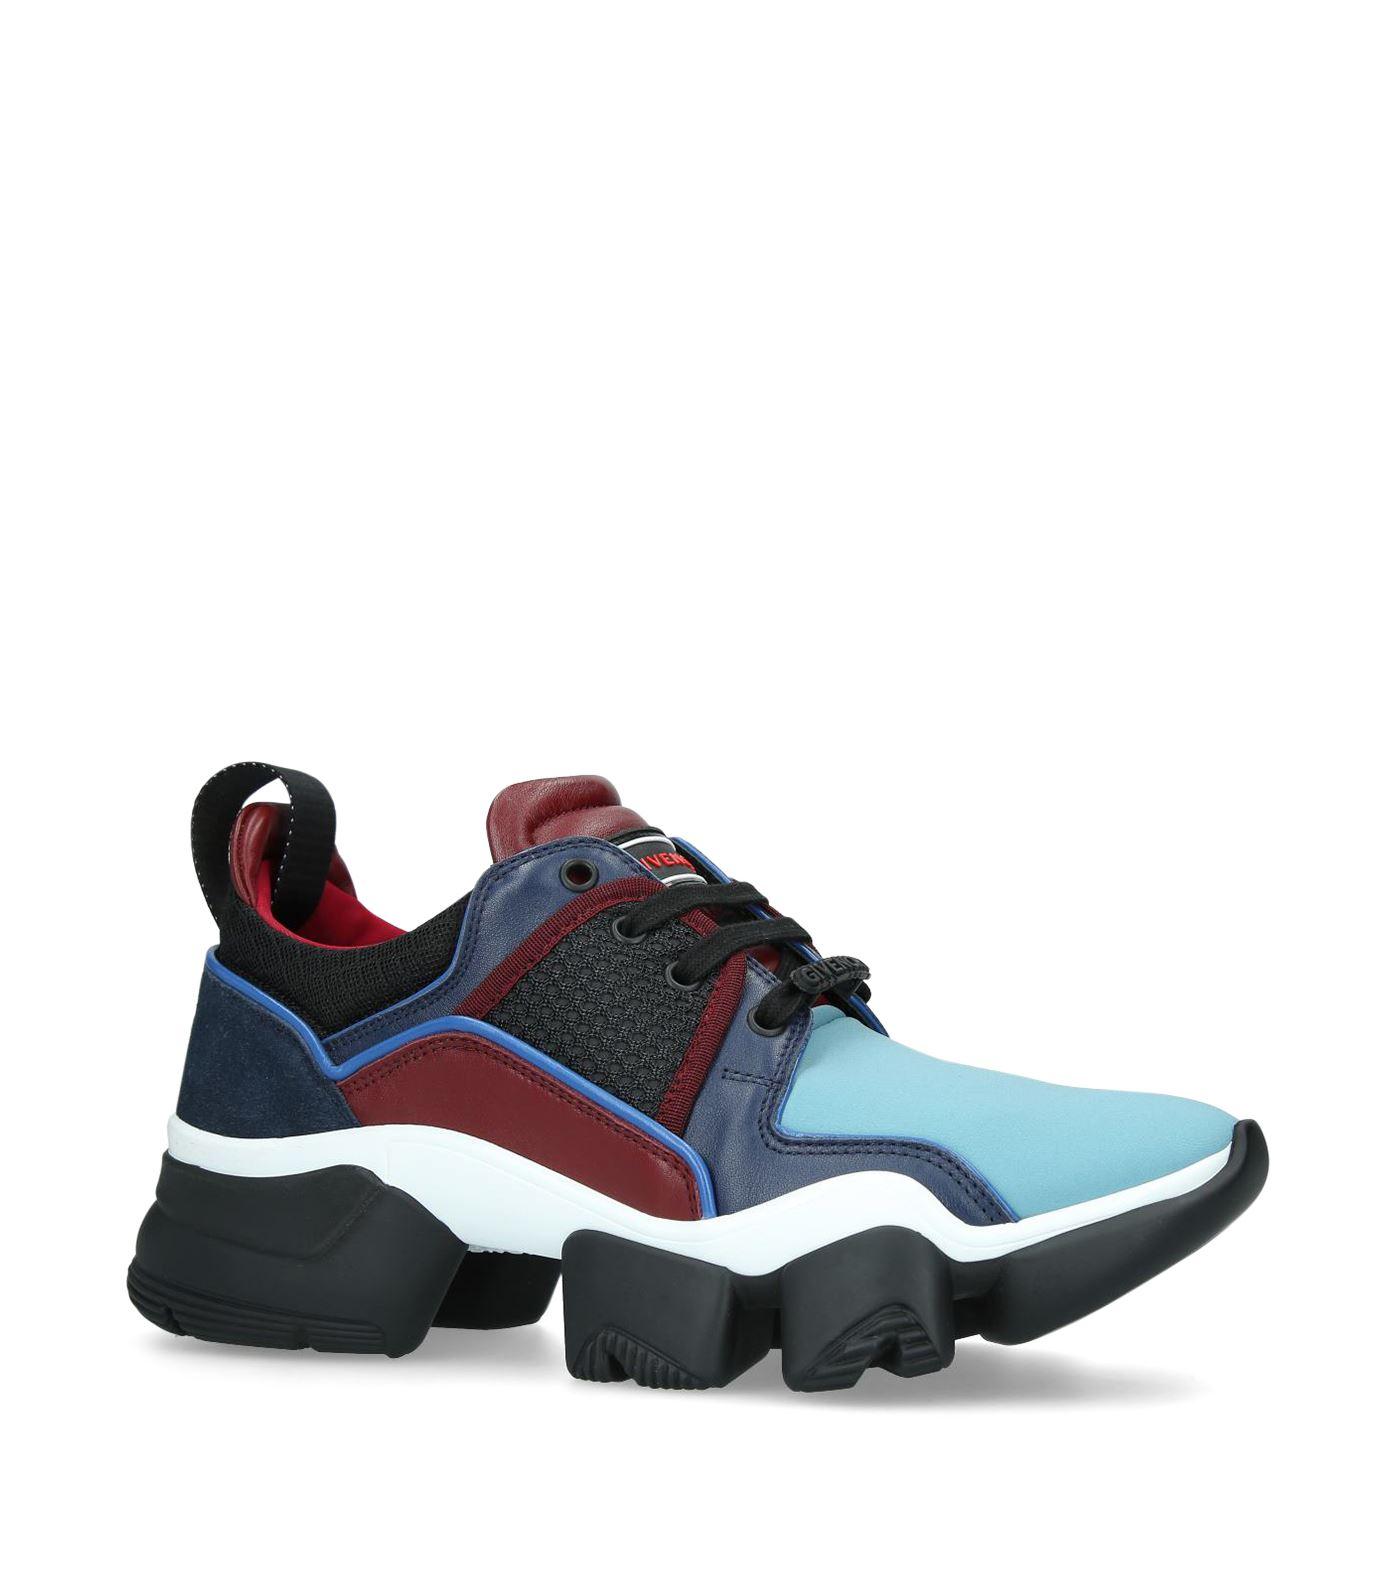 Givenchy Jaws Sneakers in Blue for Men - Lyst